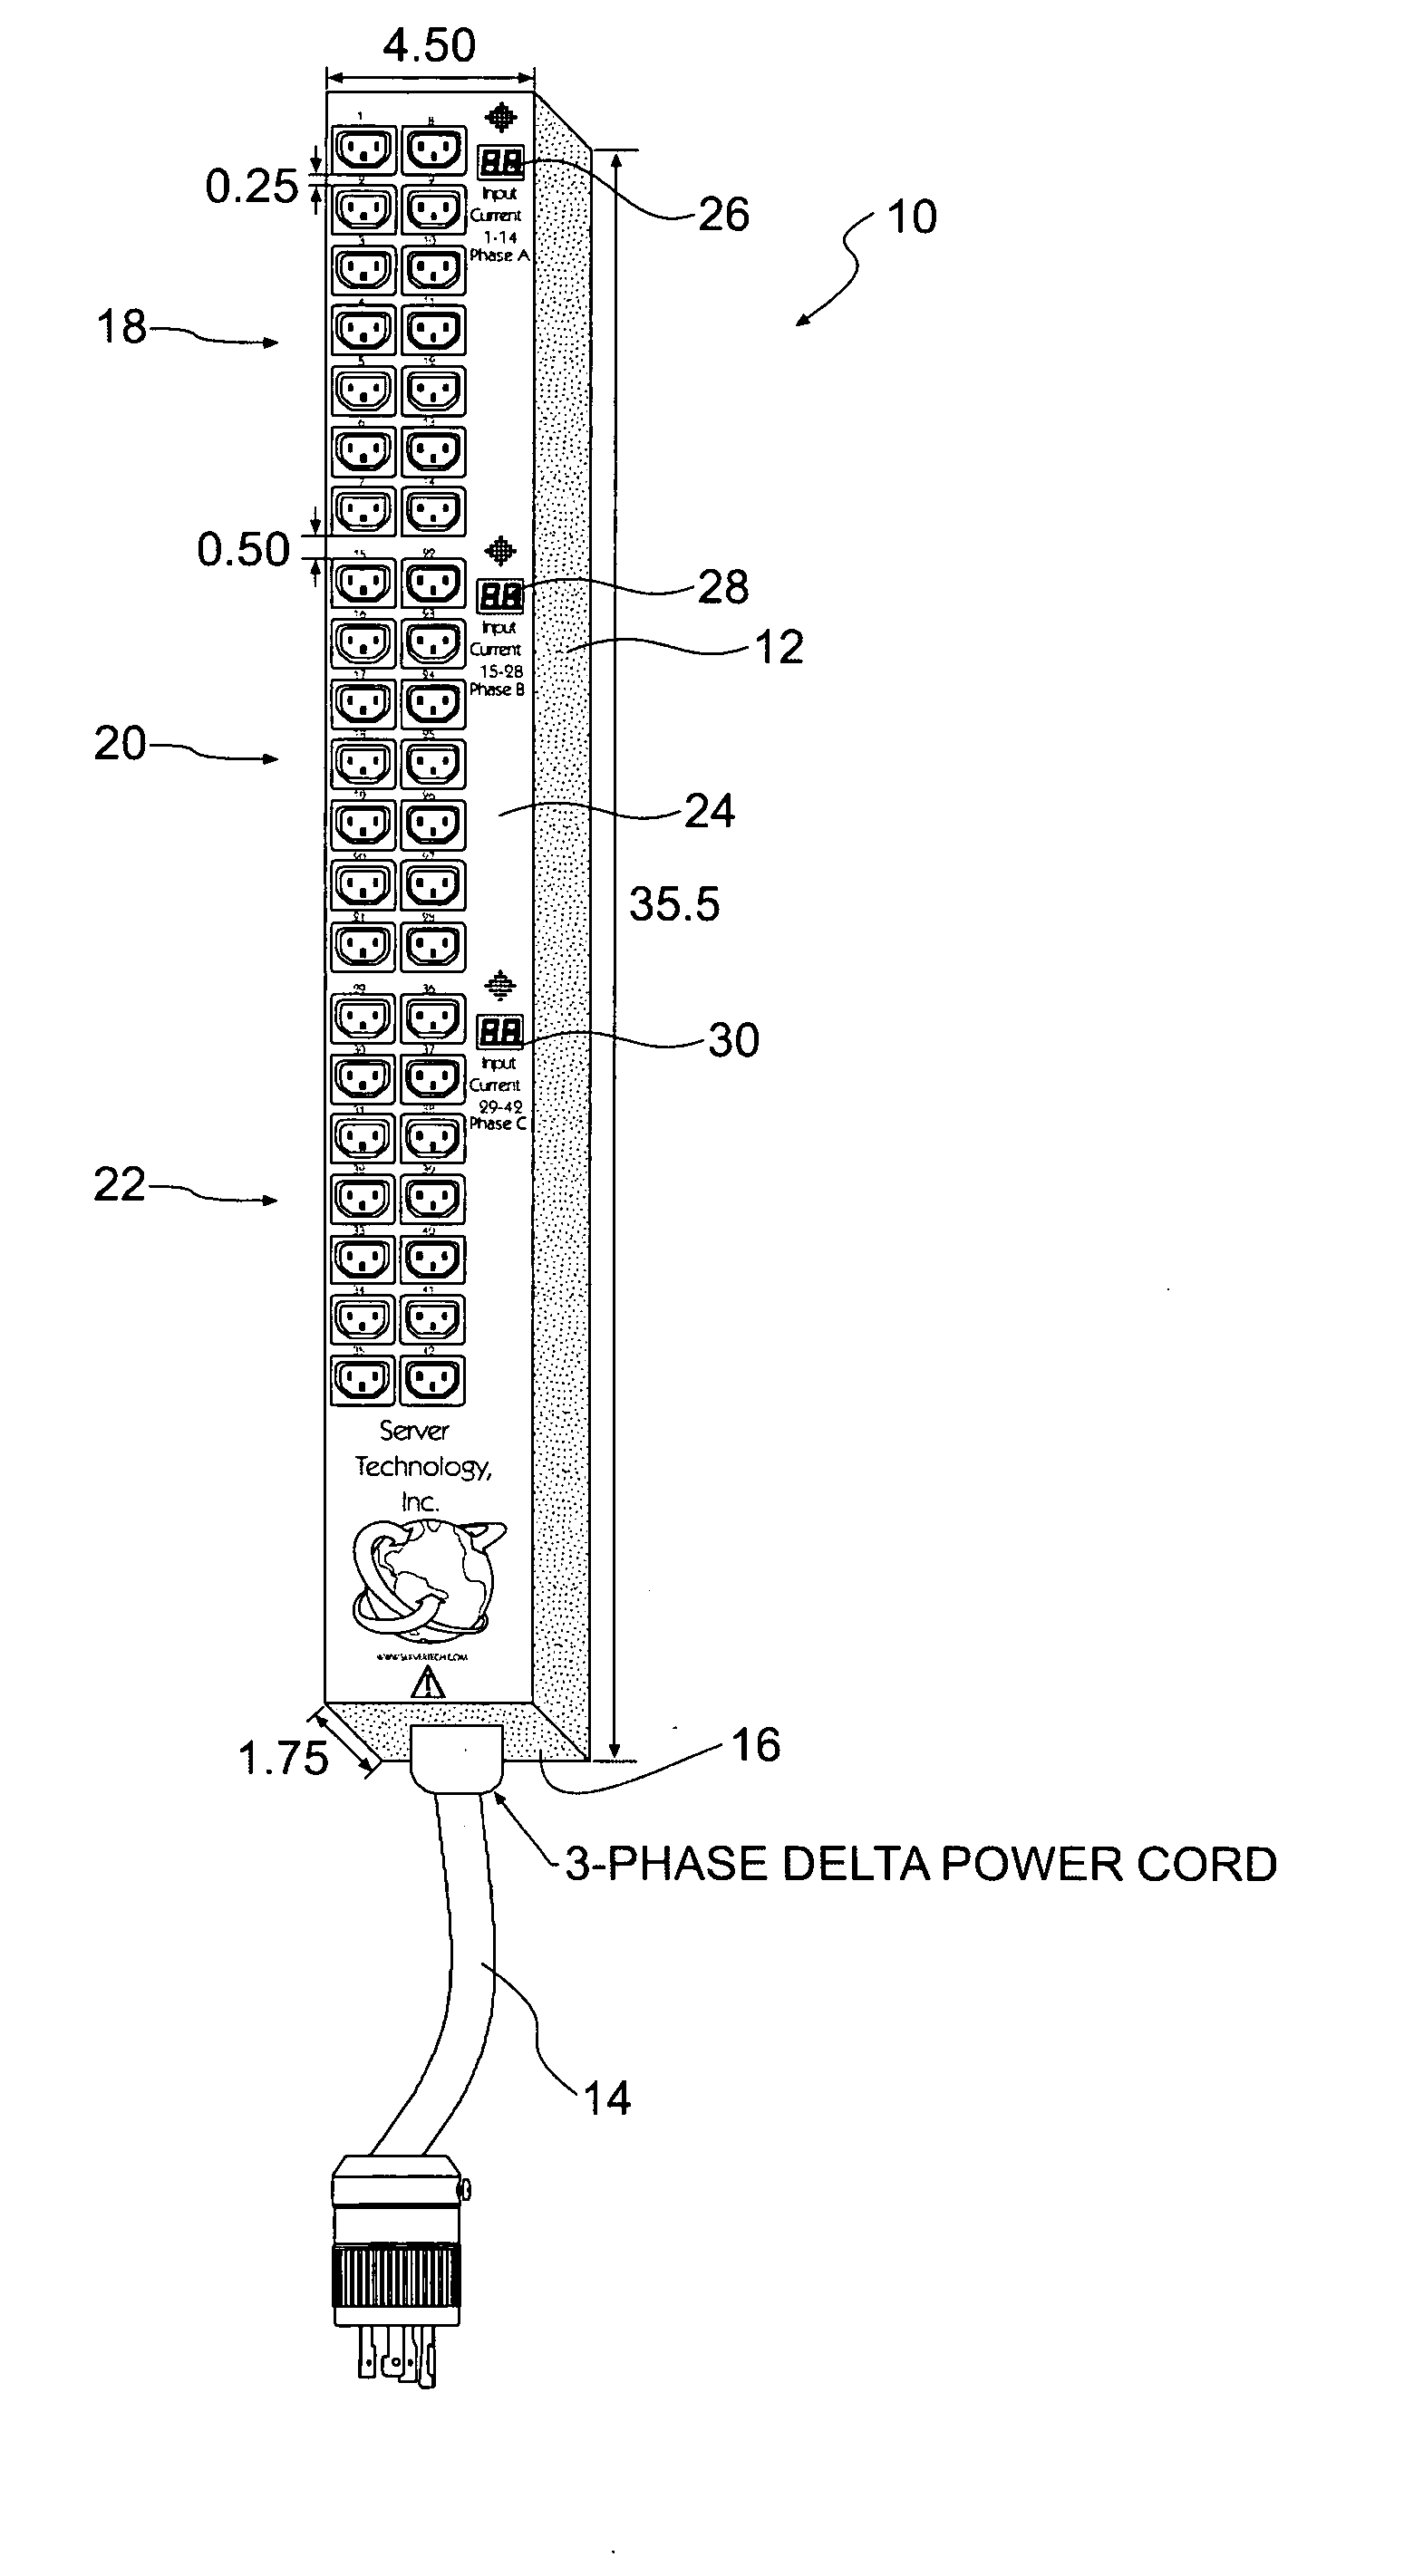 Polyphase power distribution and monitoring apparatus